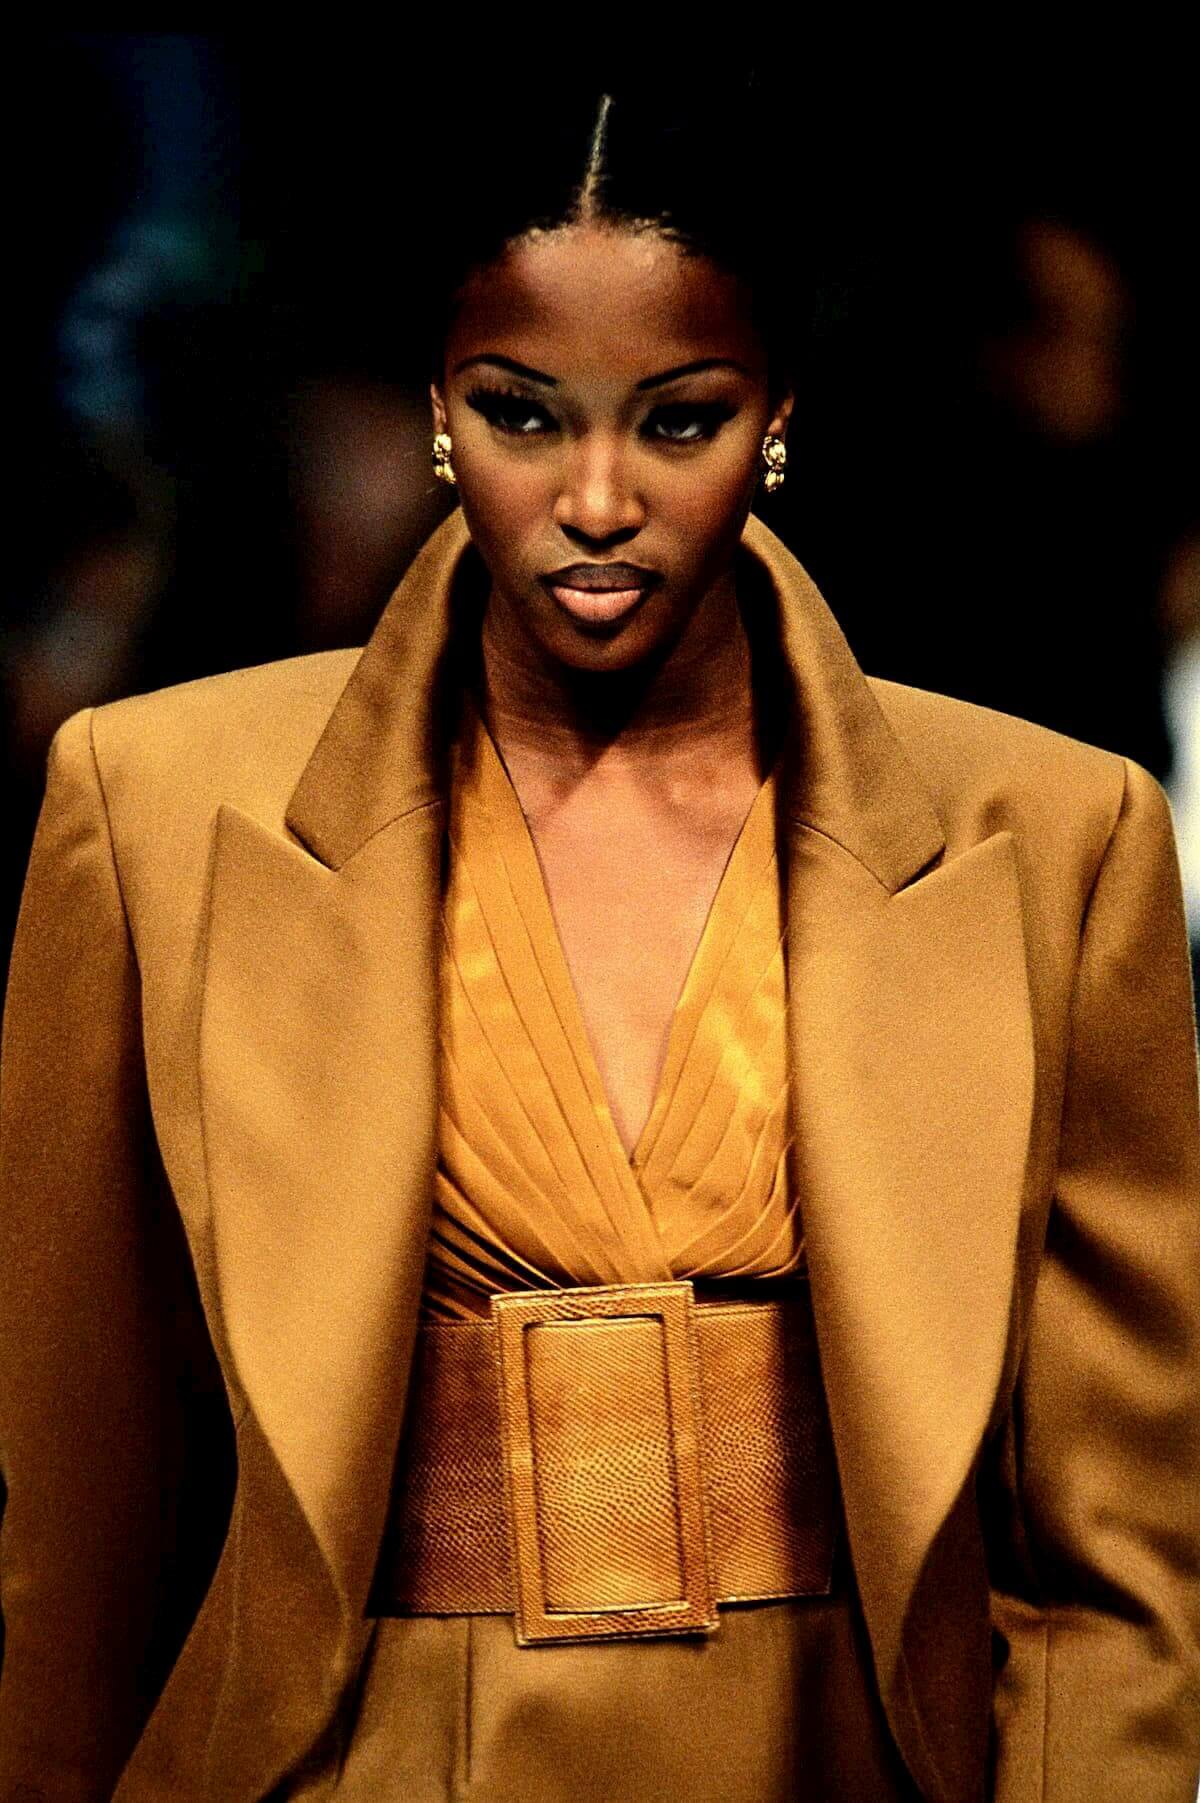 PARIS, FRANCE - OCTOBER 26: Top model Naomi Campbell walks the runway during the Azzedine Alaia Ready to Wear Spring/Summer 1992 fashion show as part of the Paris fashion week on October 26, 1992 in Paris, France. (Guliver Photos/Getty Images)